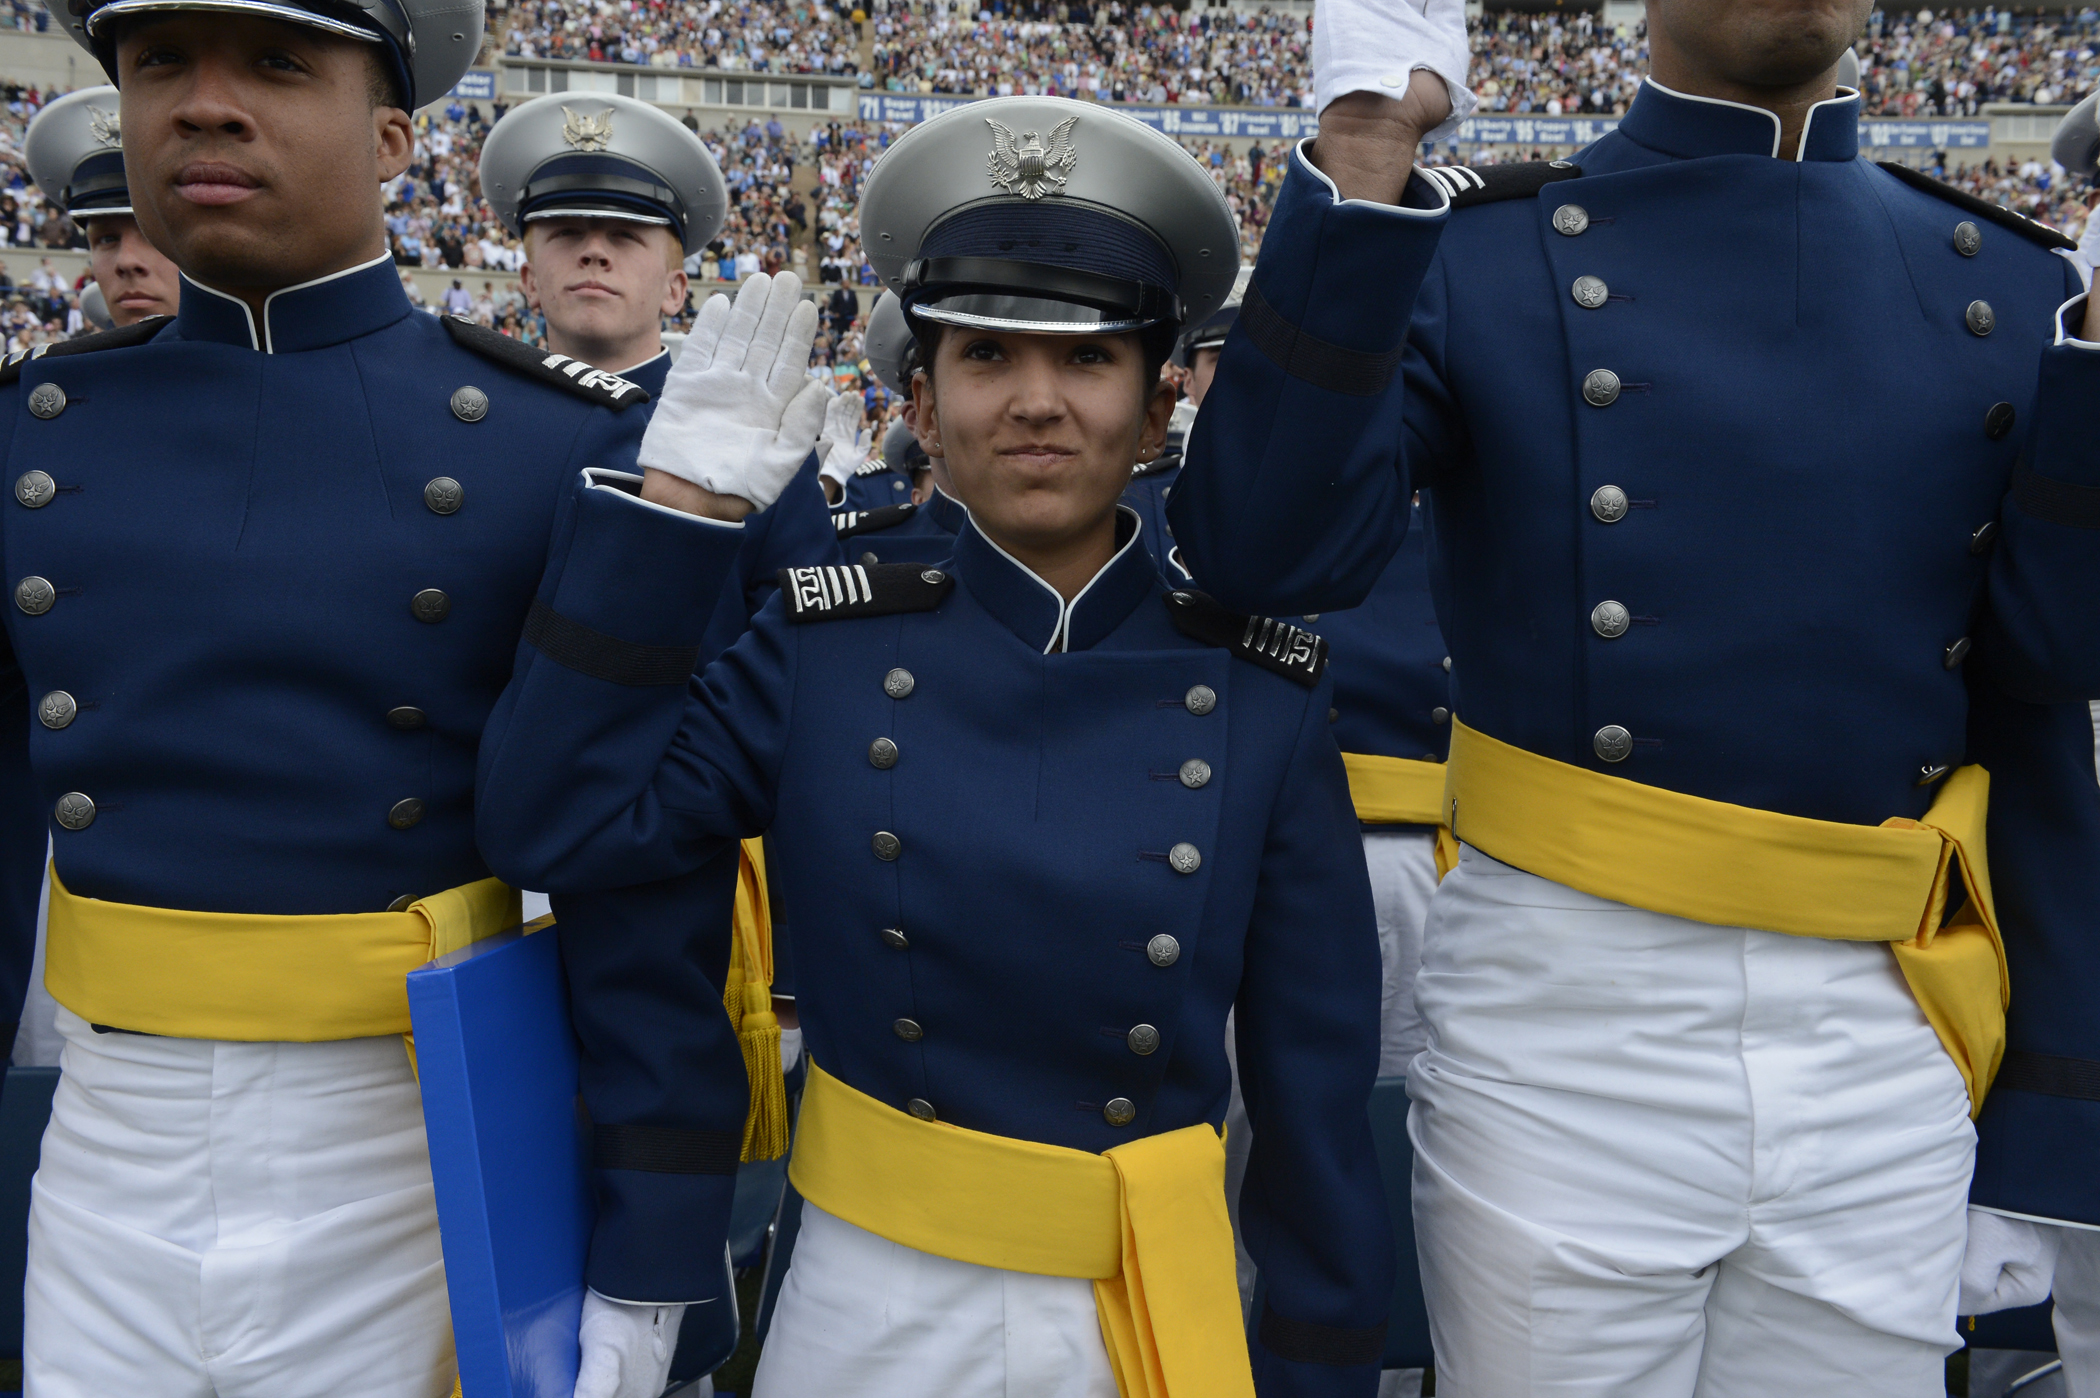 United States Air Force Academy graduation ceremony at Falcon Stadium in Colorado Springs, May 29, 2013. (Craig F. Walker—The Denver Post/Getty Images)